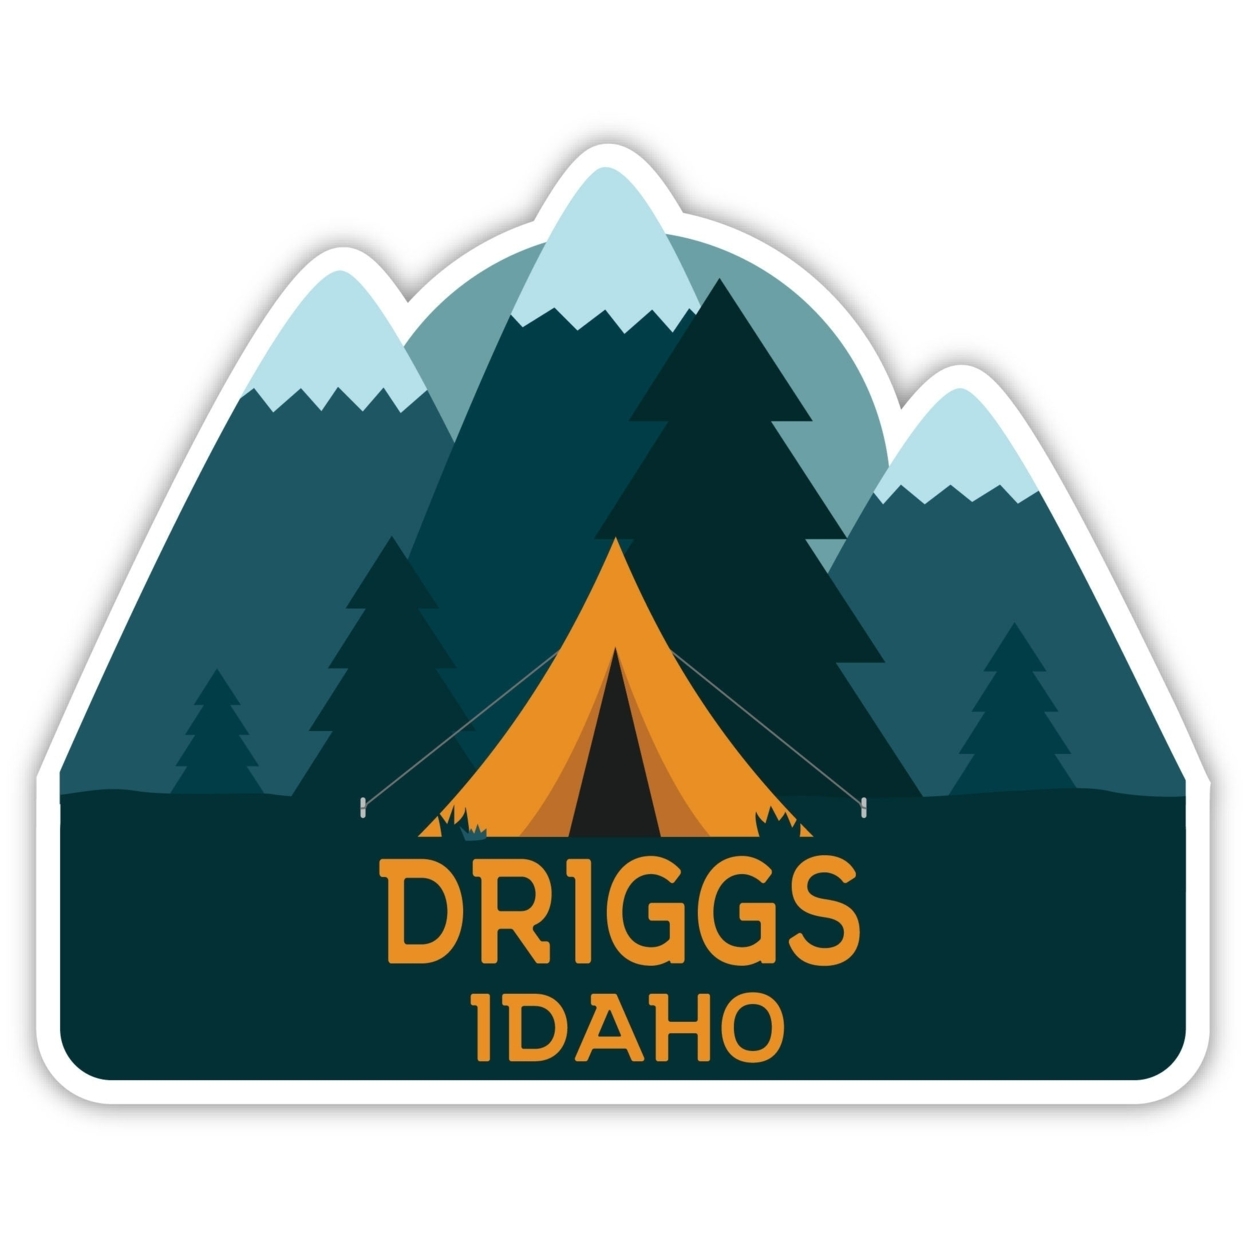 Driggs Idaho Souvenir Decorative Stickers (Choose Theme And Size) - 4-Pack, 2-Inch, Bear